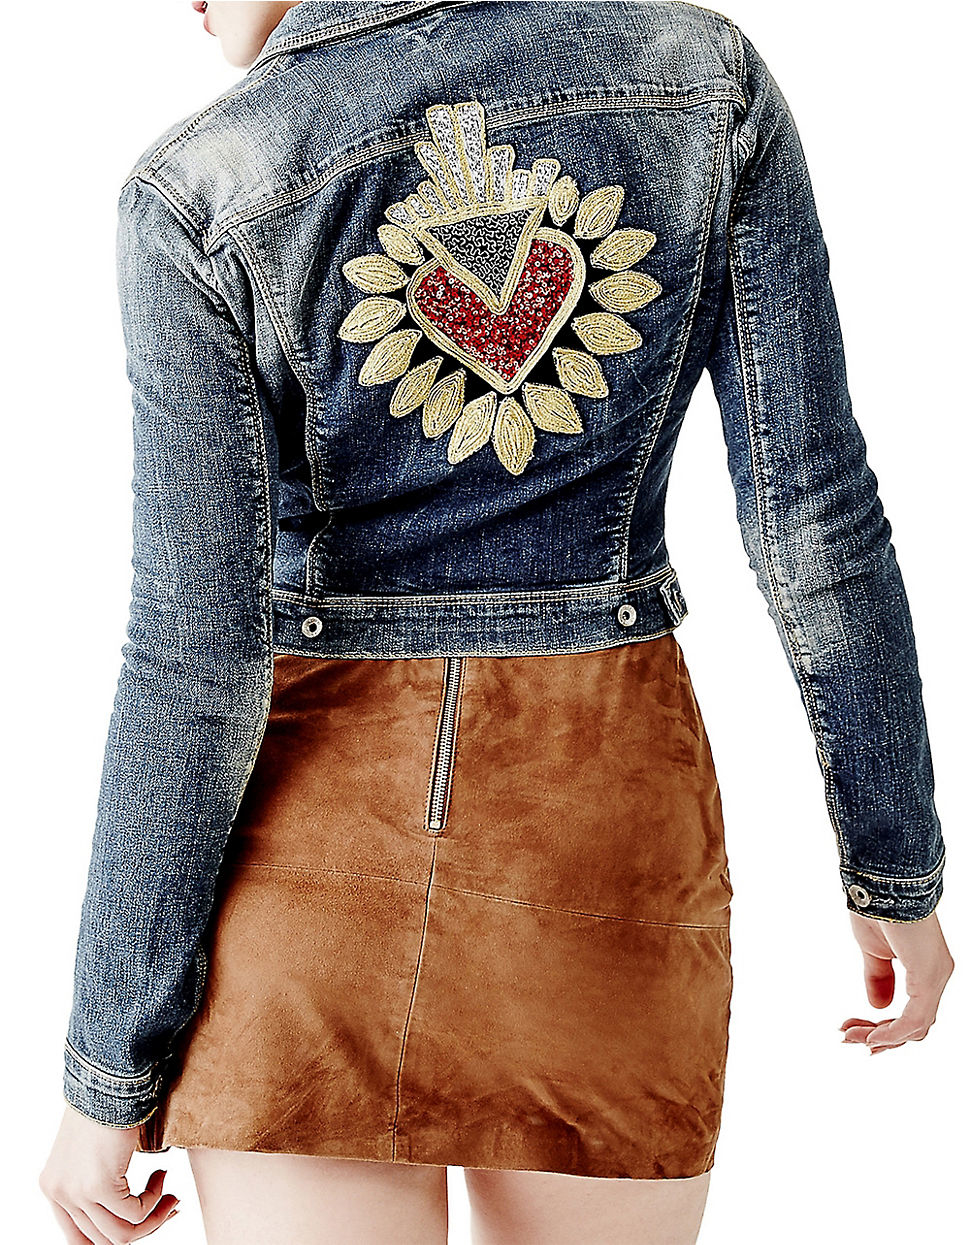 Lyst - Guess Cropped Embroidered Denim Jacket in Blue